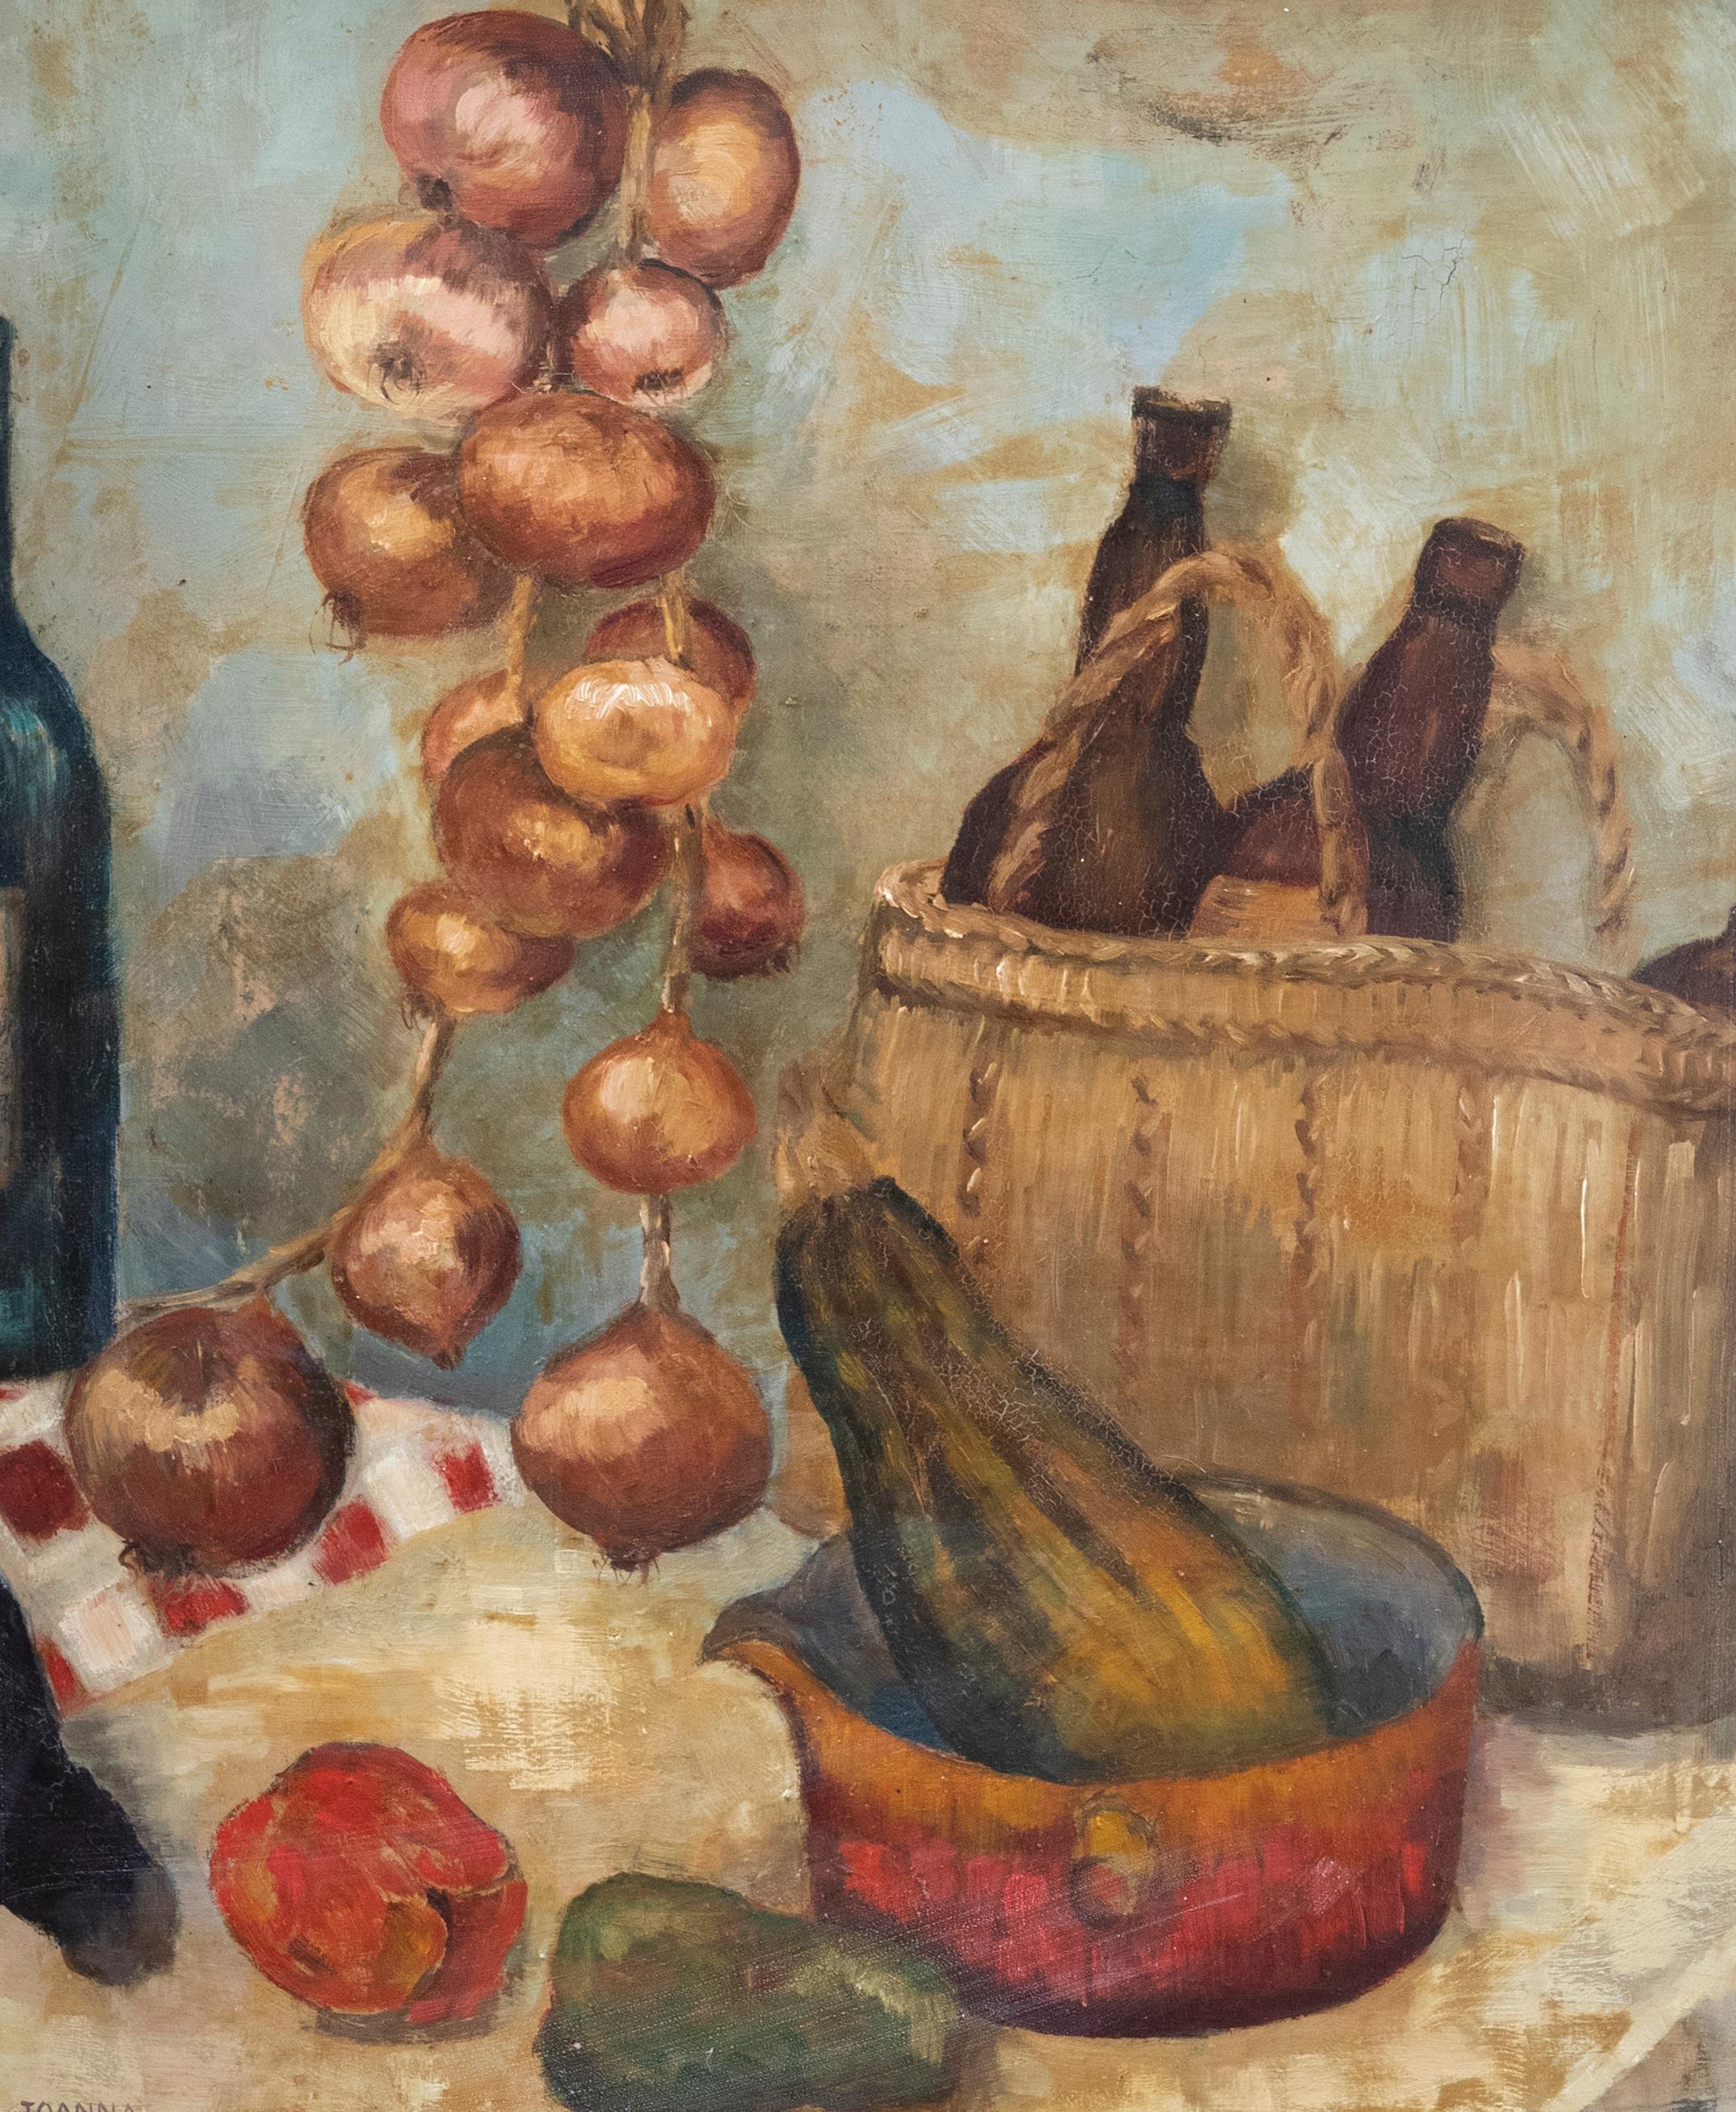 Joanna Myles - Framed 20th Century Oil, Still Life with Vegetables - Painting by Unknown